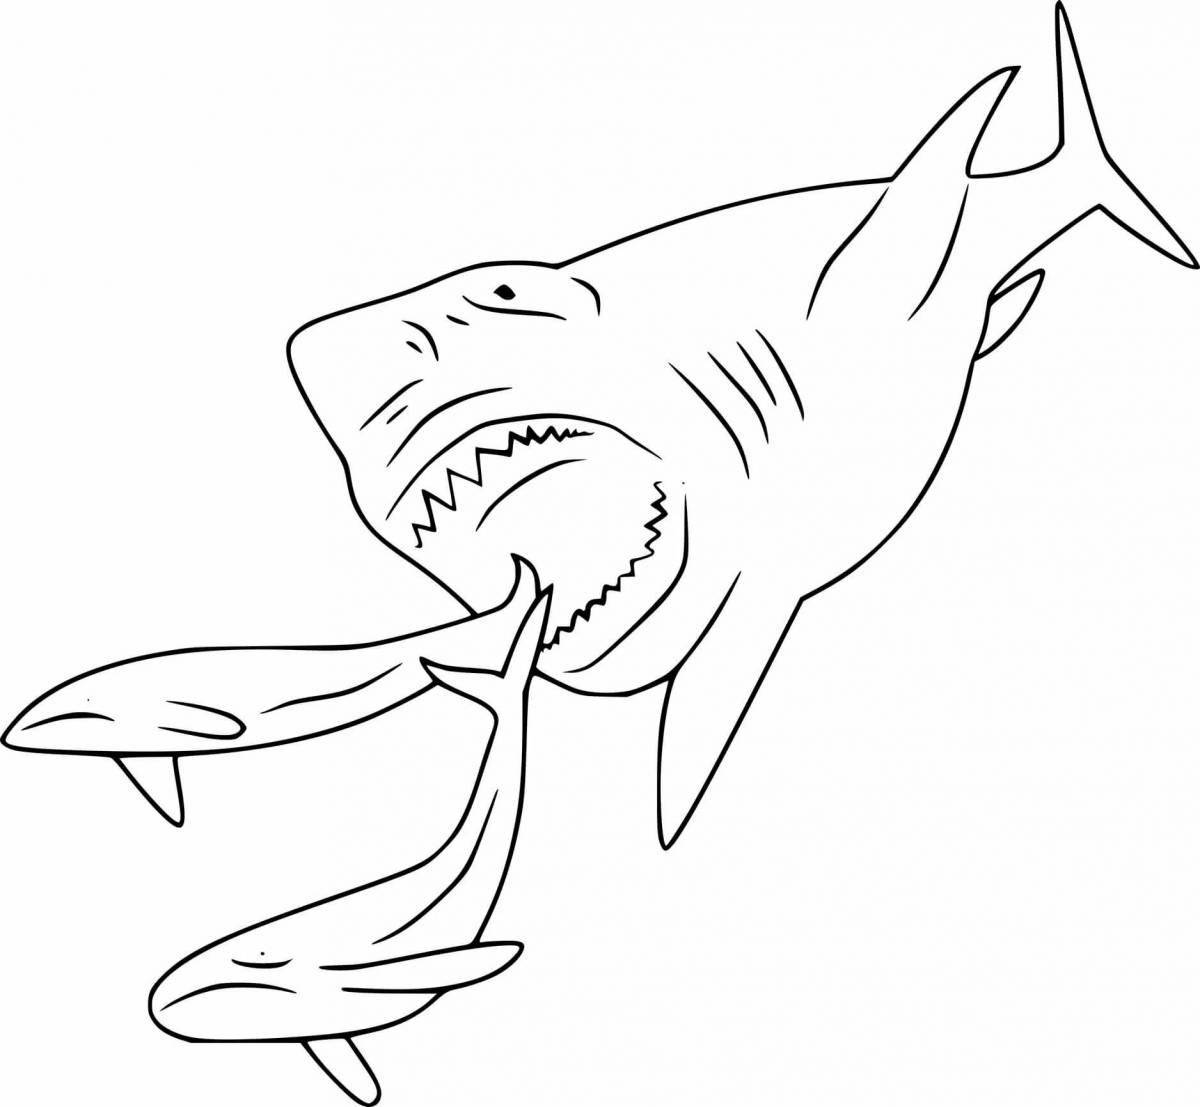 Megalodon coloring book for kids